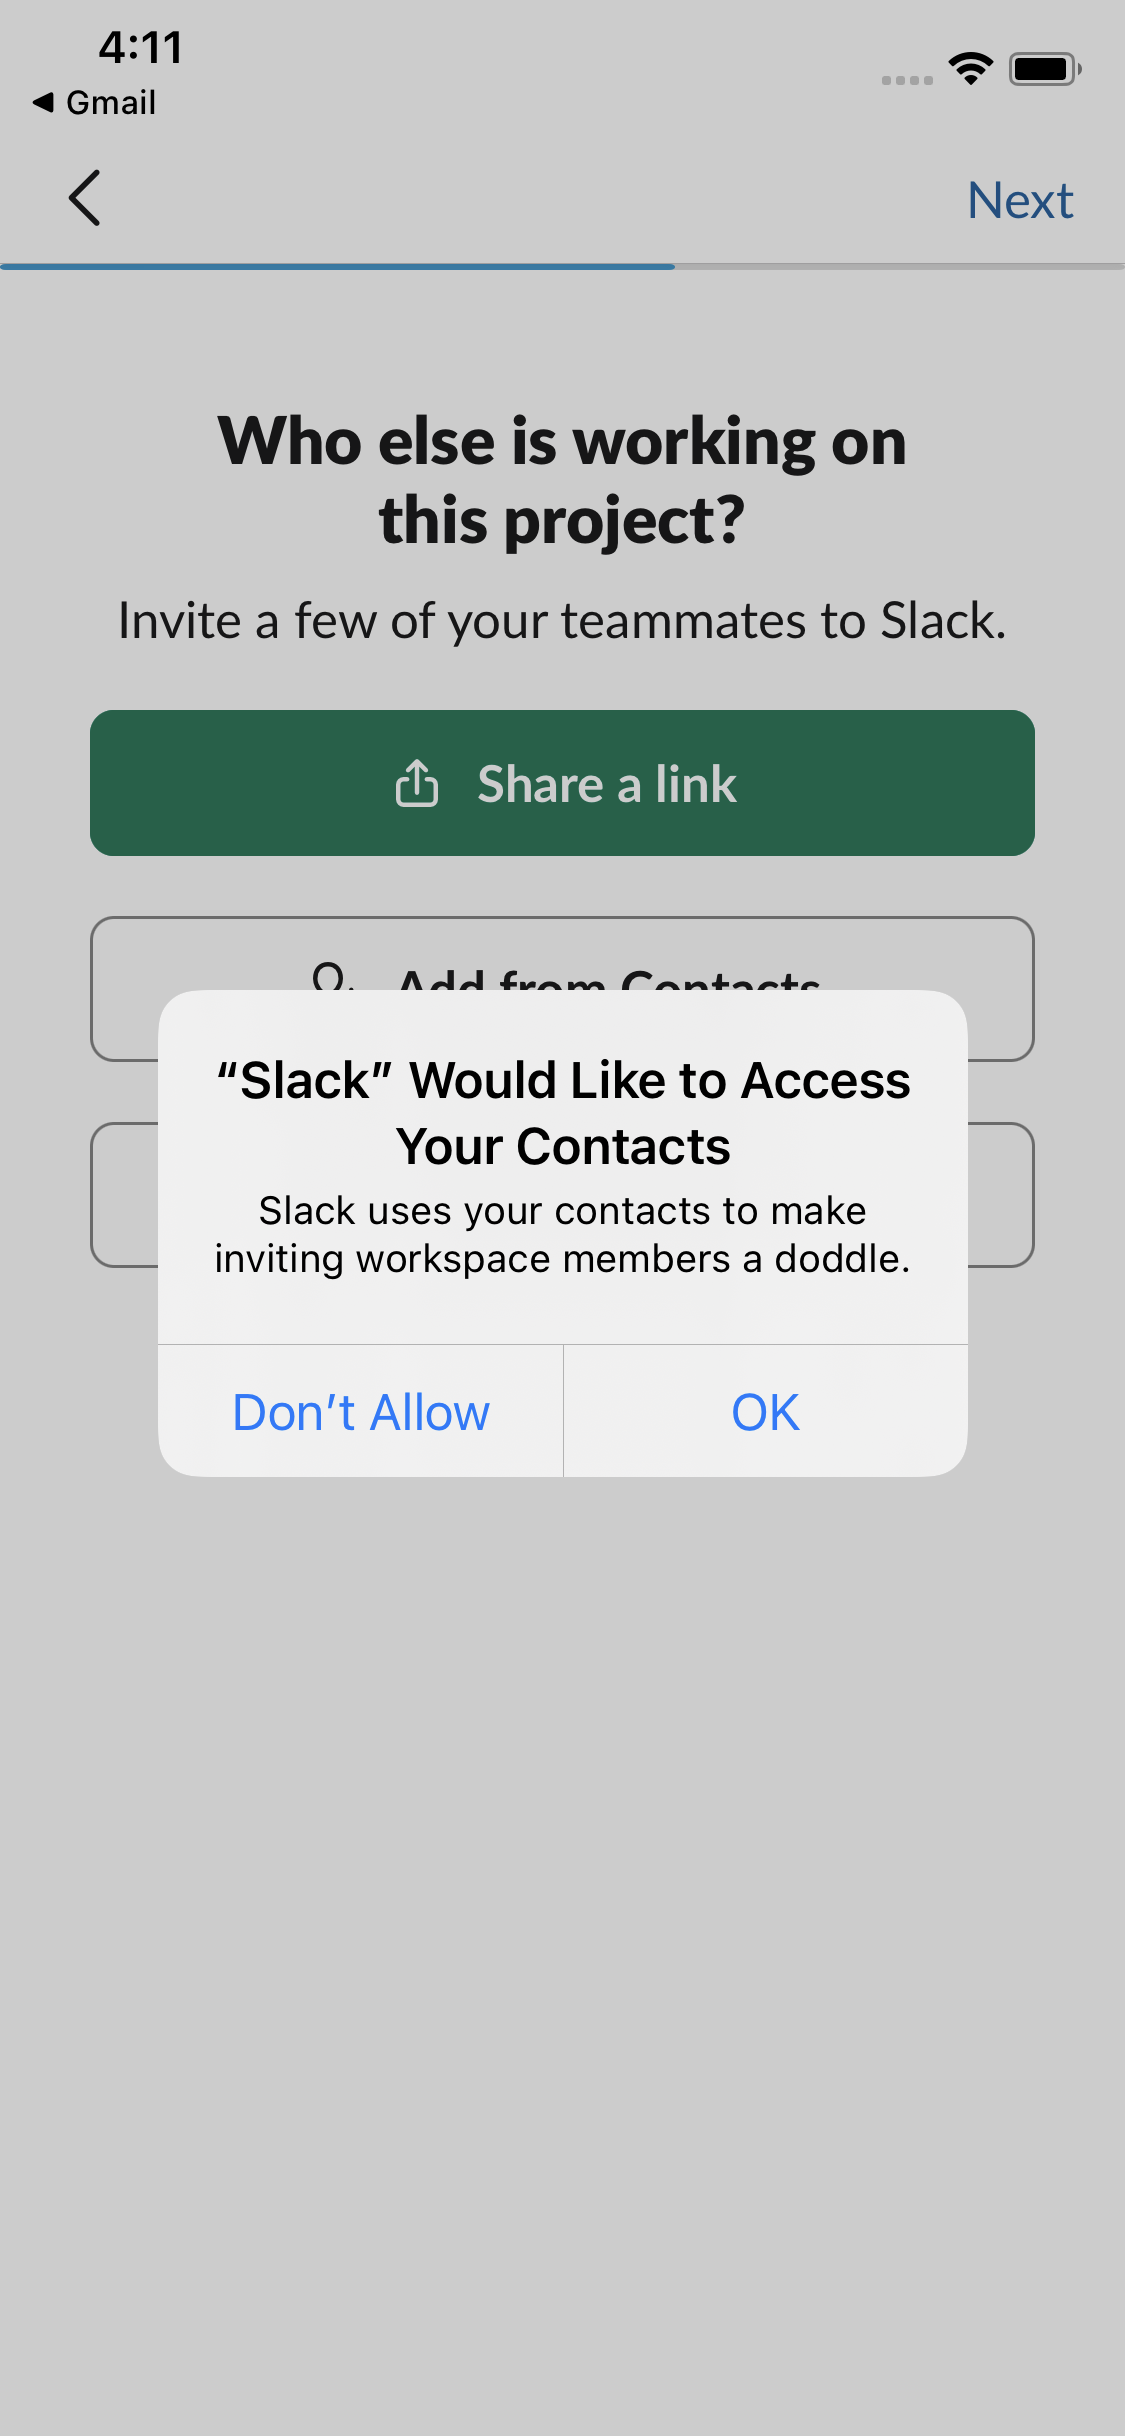 install slack on phone without gmail